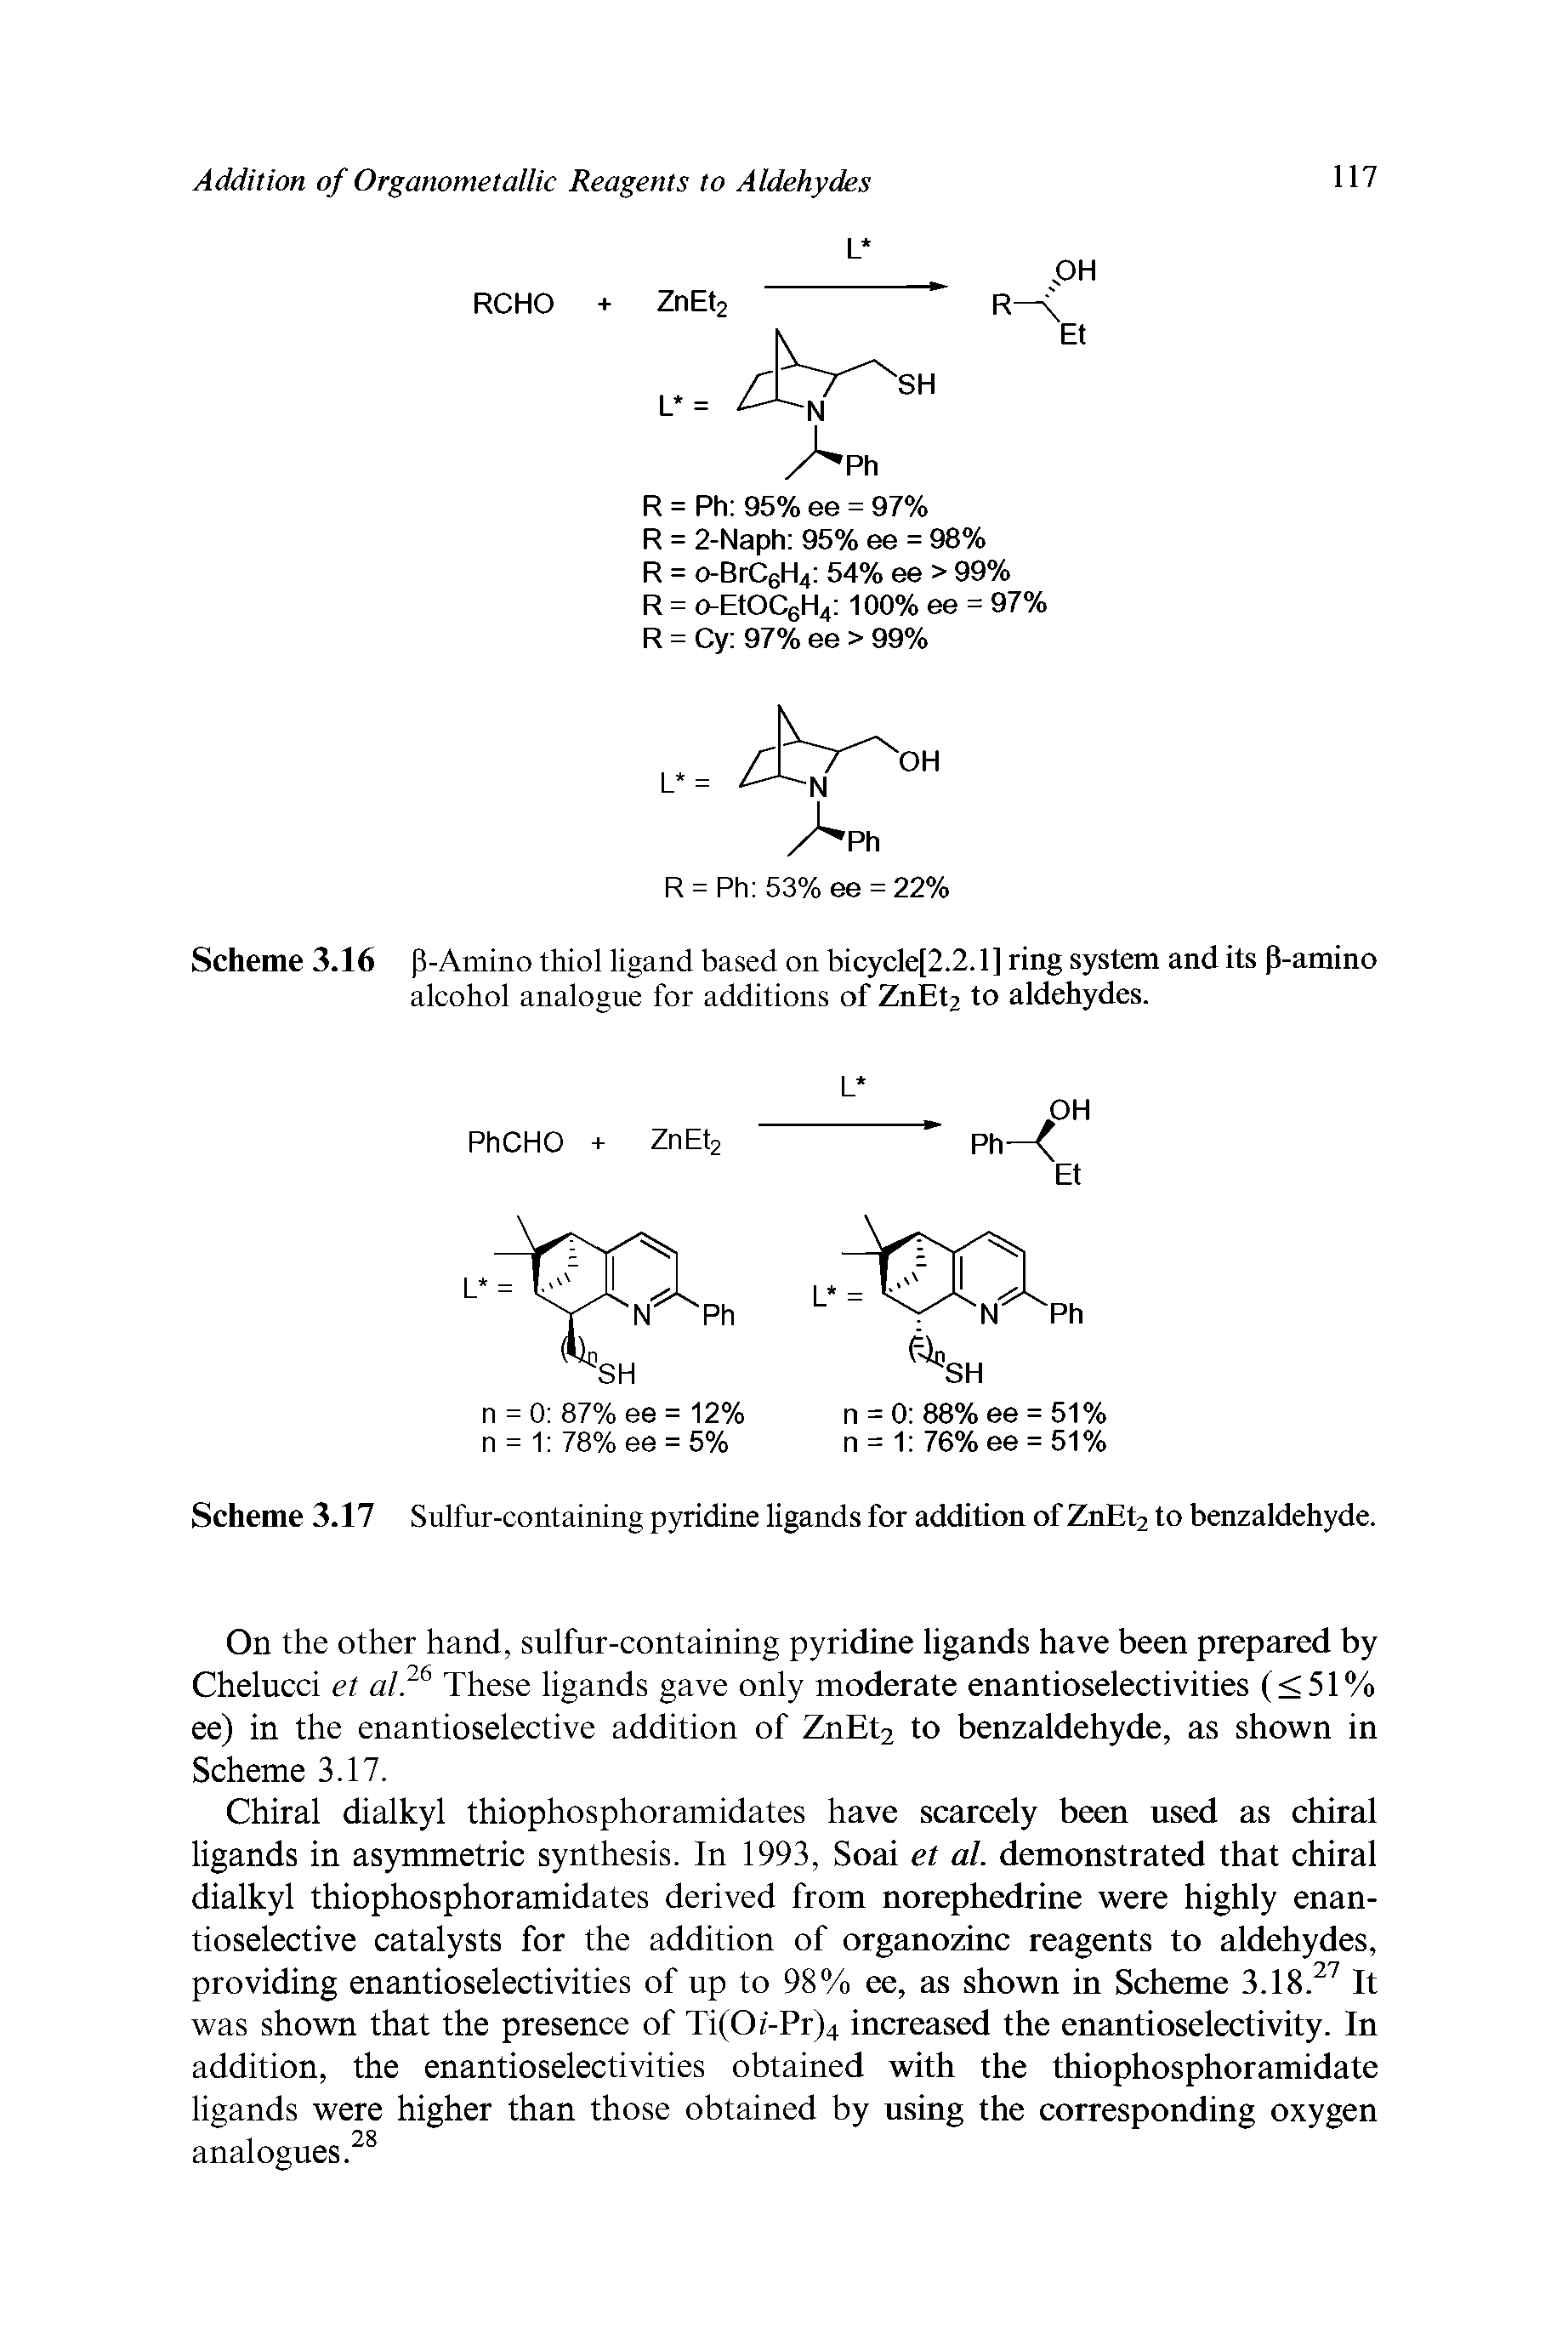 Scheme 3.16 P-Amino thiol ligand based on bicycle[2.2.1] ring system and its P-amino alcohol analogue for additions of ZnEt2 to aldehydes.